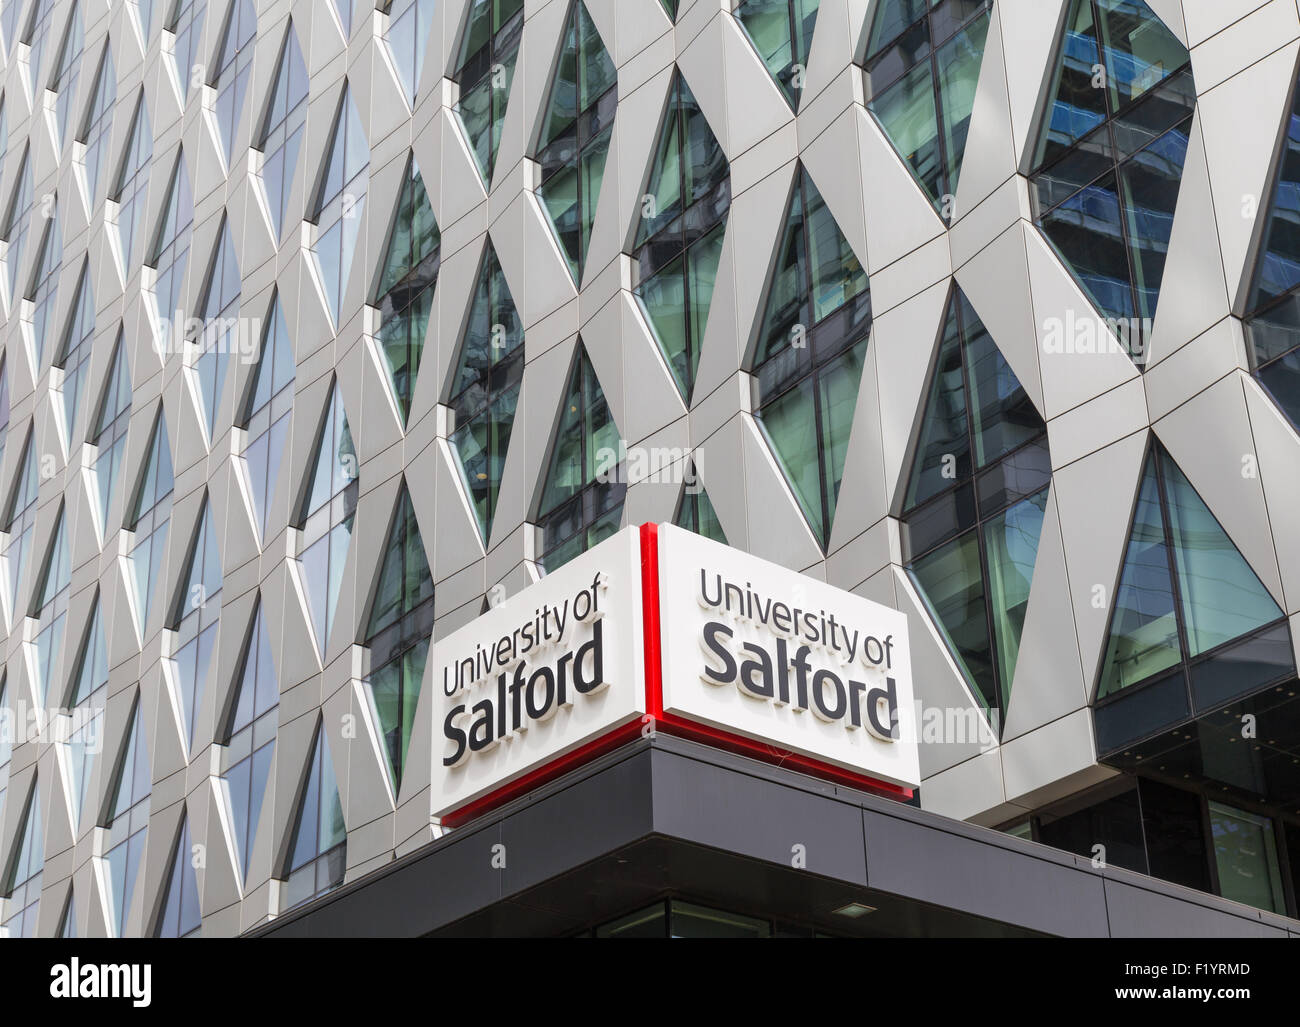 University of Salford at Salford Quays, Manchester, England. UK Stock Photo